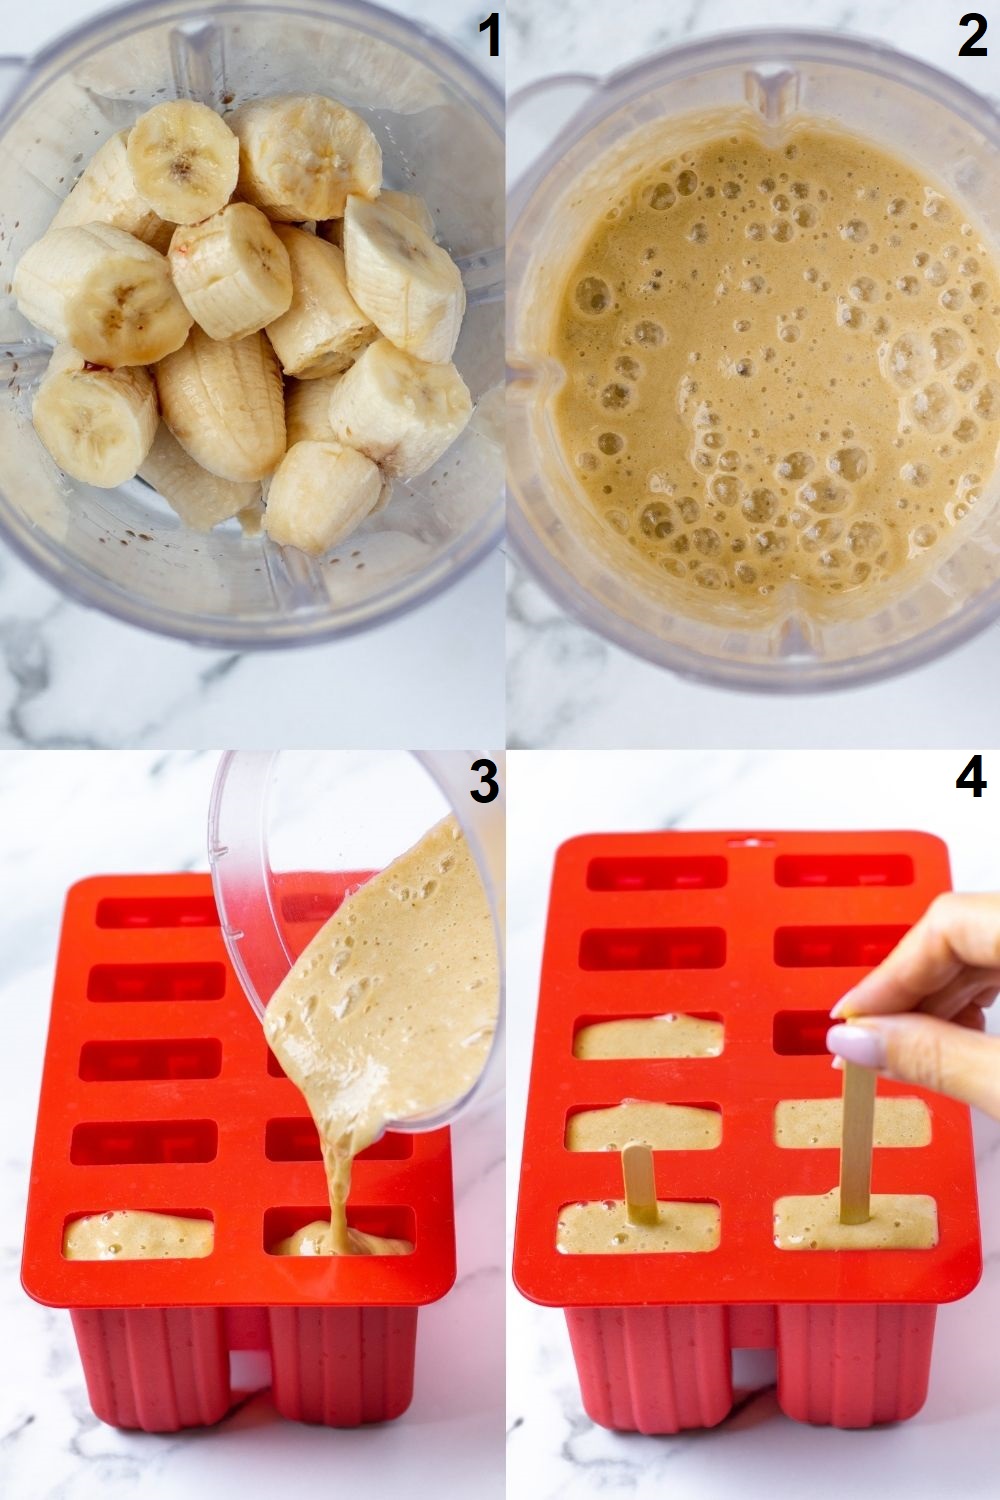 Photo collage of four steps needed to make banana popsicles using a blender and a red popsicle mold